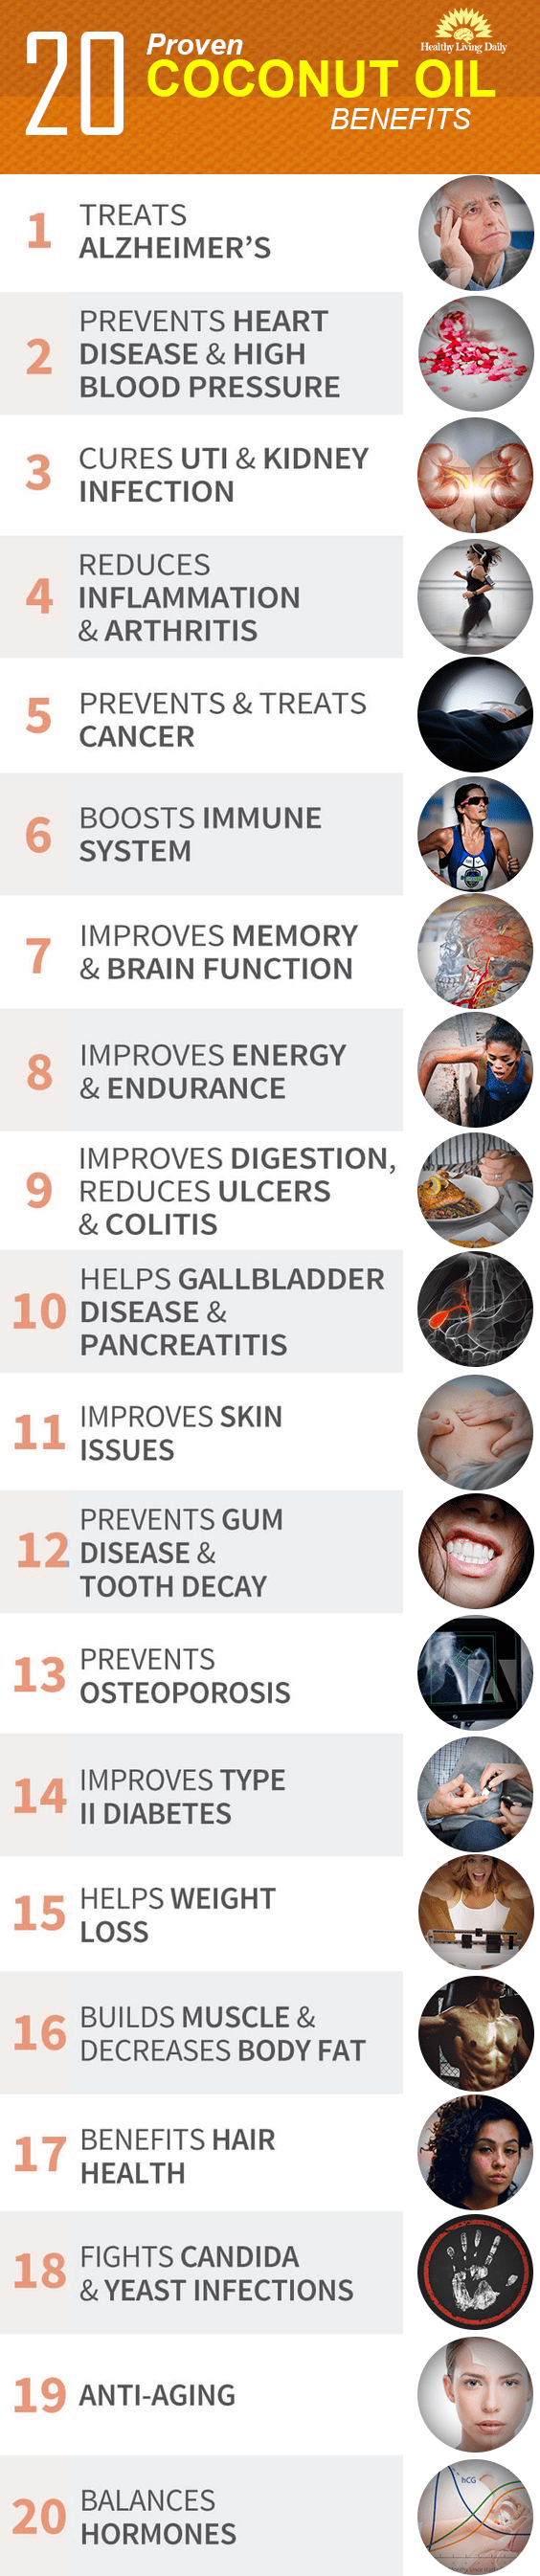 20 Proven Coconut Oil Benefits Infographic